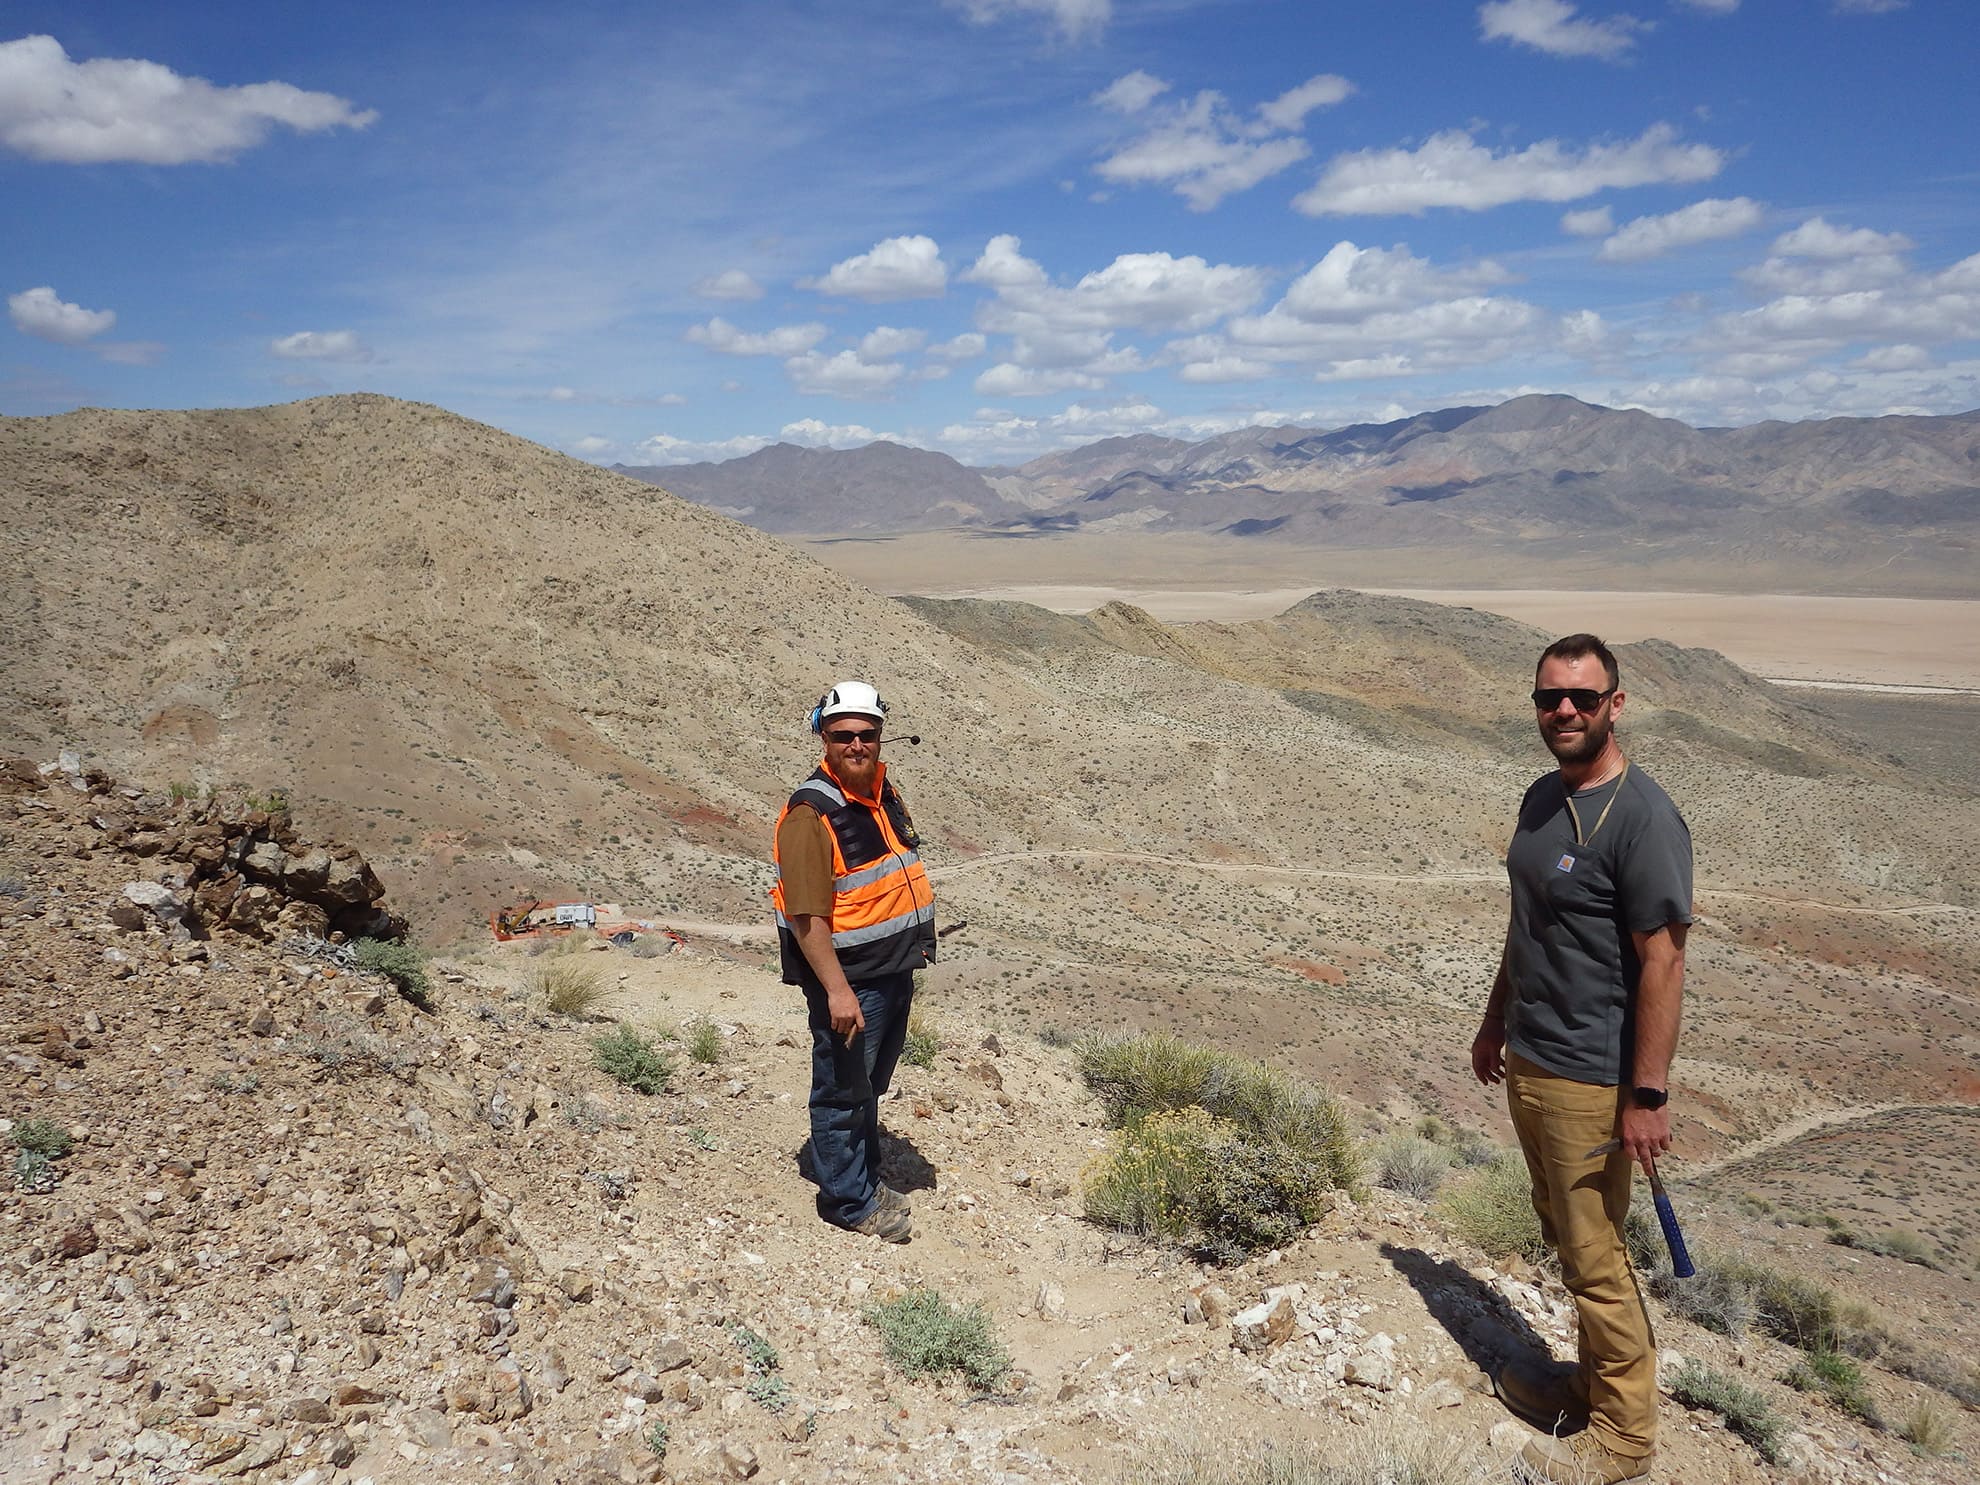 View north at East Zone bowl, with VP Exploration Justin Daley in foreground, drill at drill hole NB24-001 in East Zone bowl in middle ground, and Soda Spring valley and Highway 95 connecting Reno and Vegas’ in background.